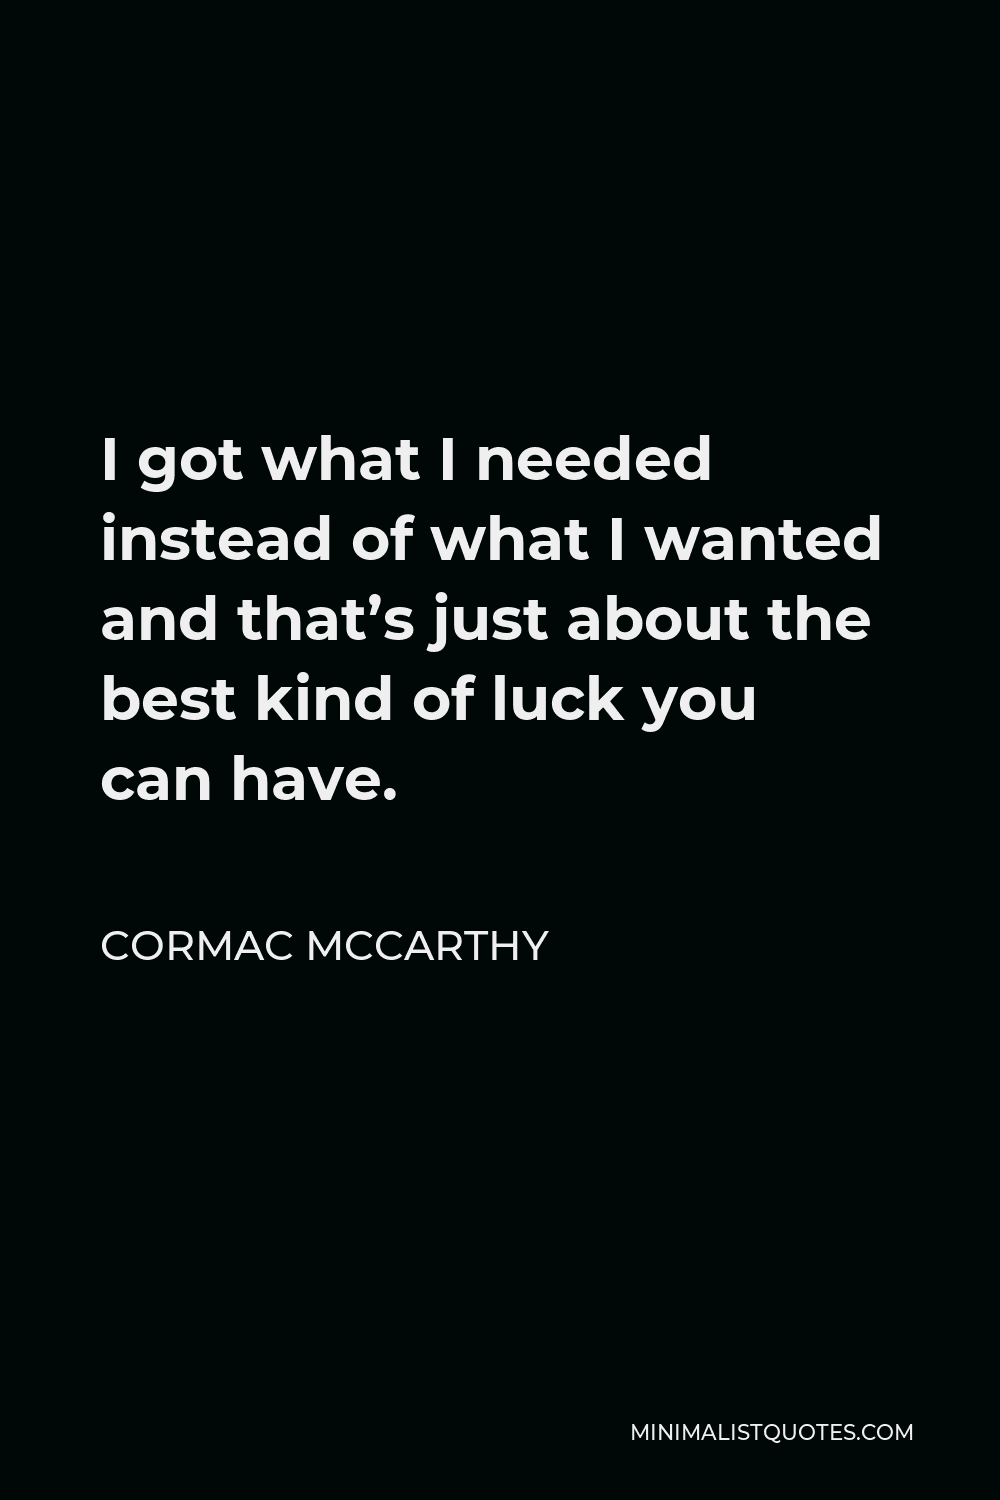 Cormac McCarthy Quote - I got what I needed instead of what I wanted and that’s just about the best kind of luck you can have.